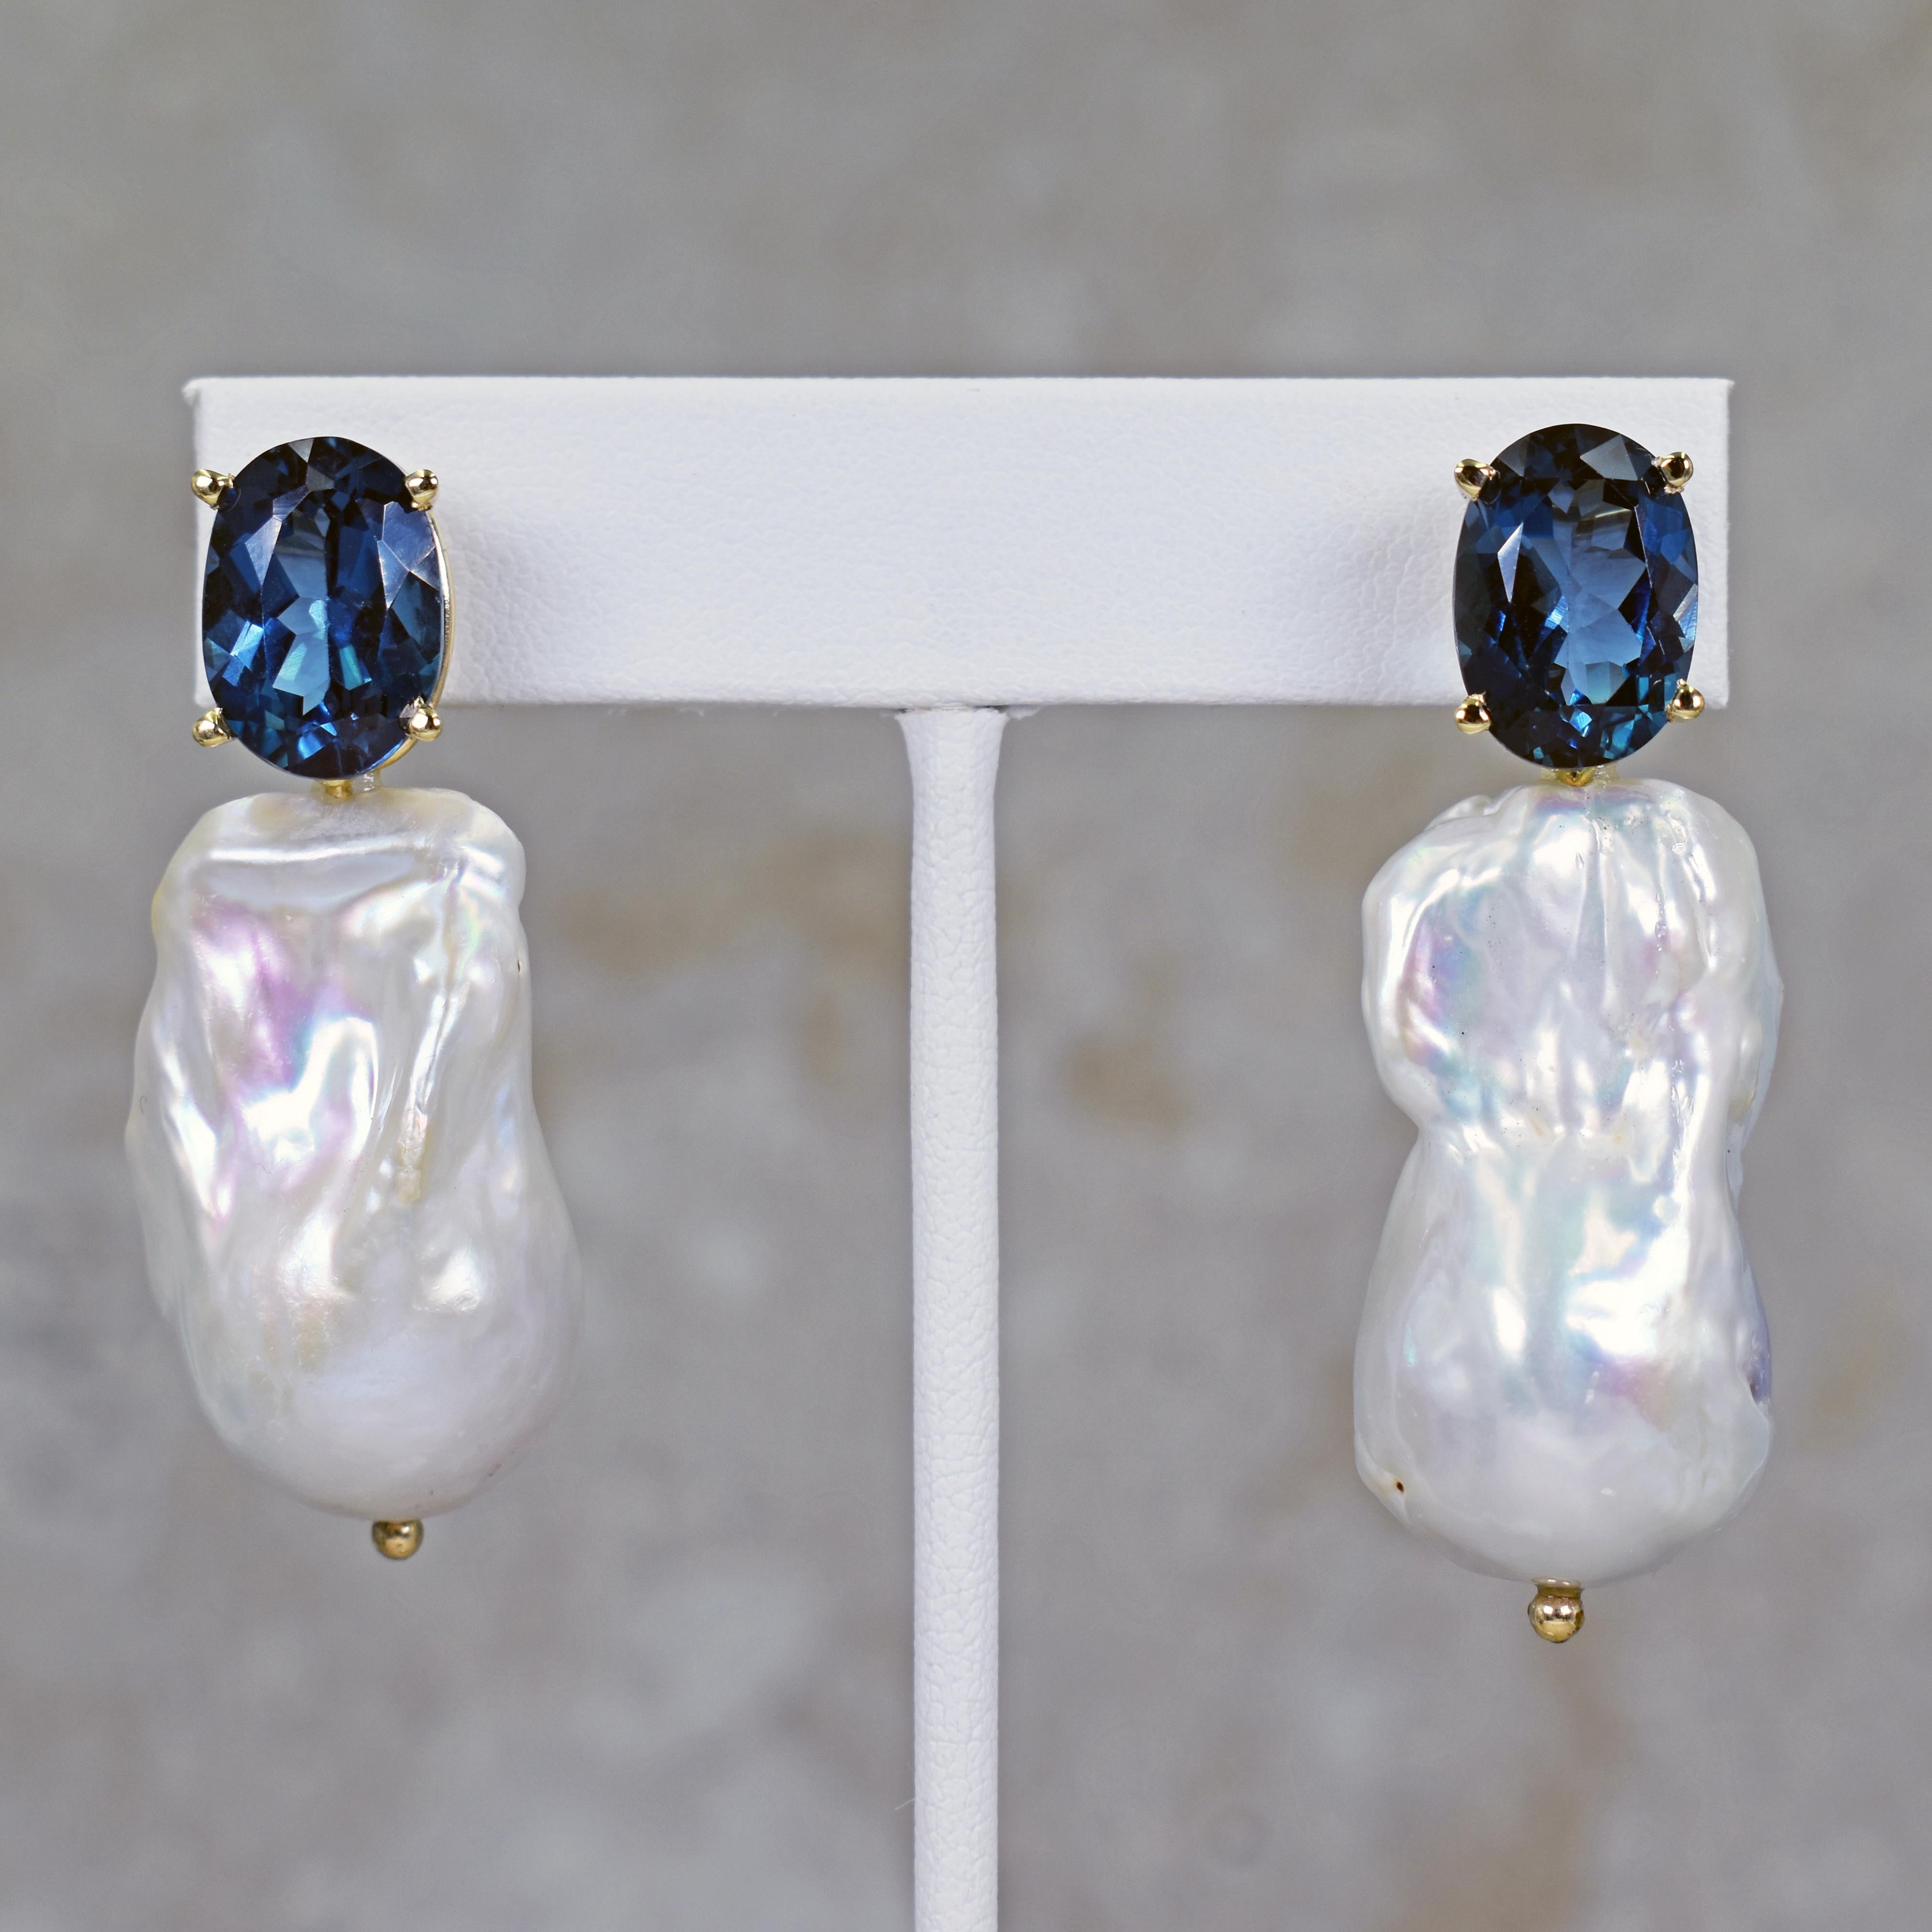 Gorgeous and unique 14k yellow gold stud earrings featuring two oval-cut London Blue Topaz gemstones, totaling 14.74 carats, with large Freshwater Baroque Pearls. Stud earrings are 2 inches or 51 mm in length. These artisan statement drop earrings